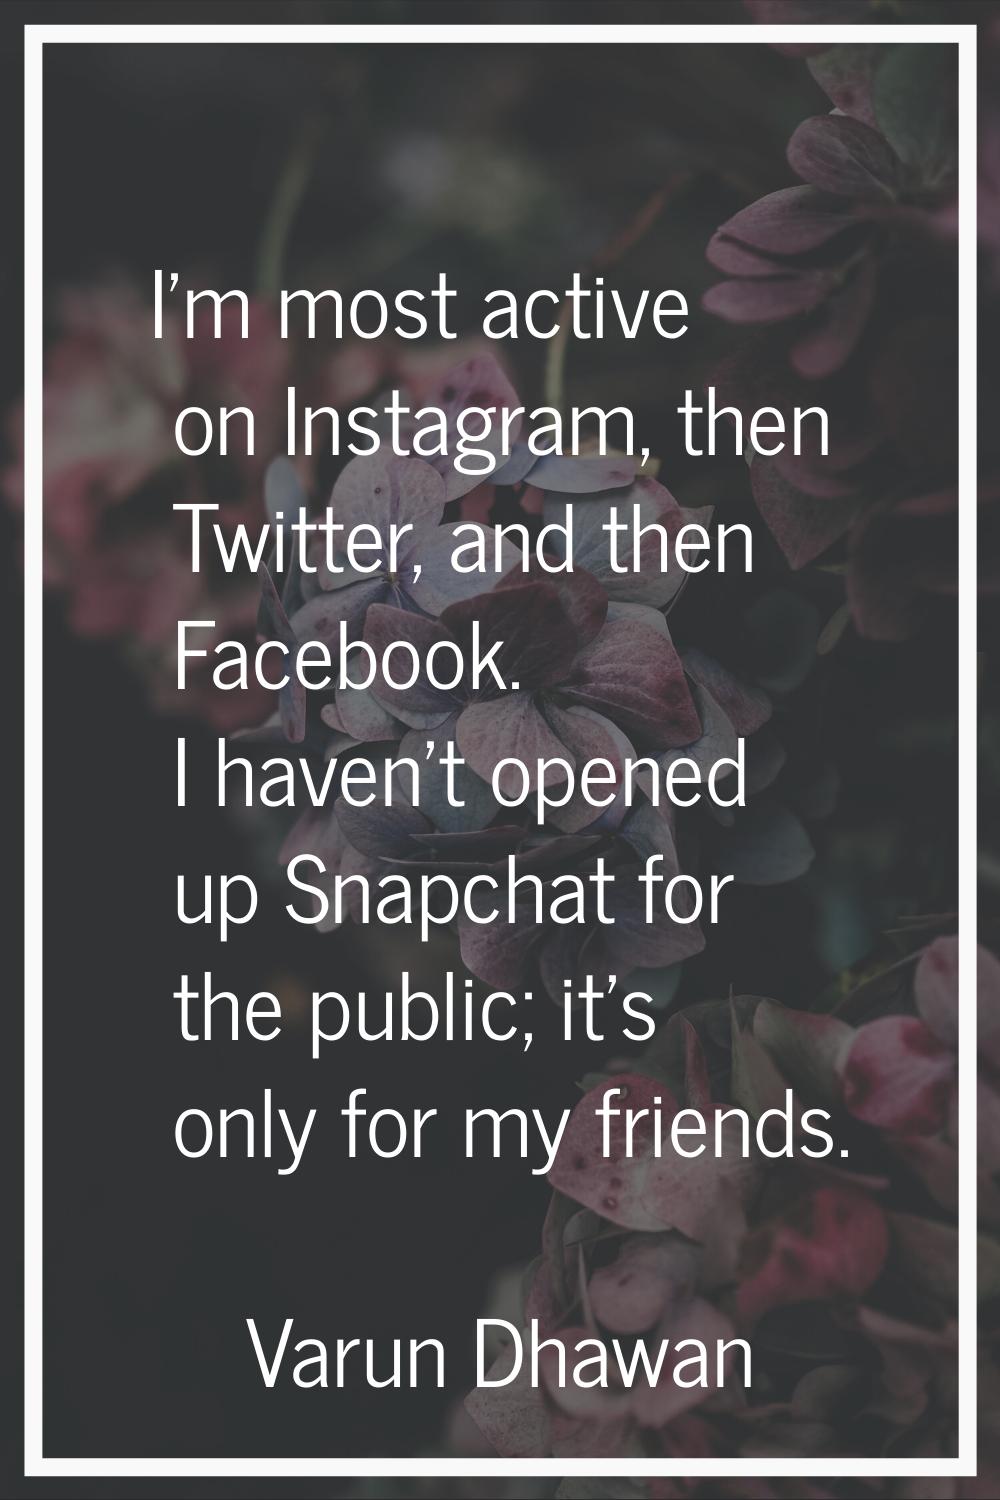 I'm most active on Instagram, then Twitter, and then Facebook. I haven't opened up Snapchat for the